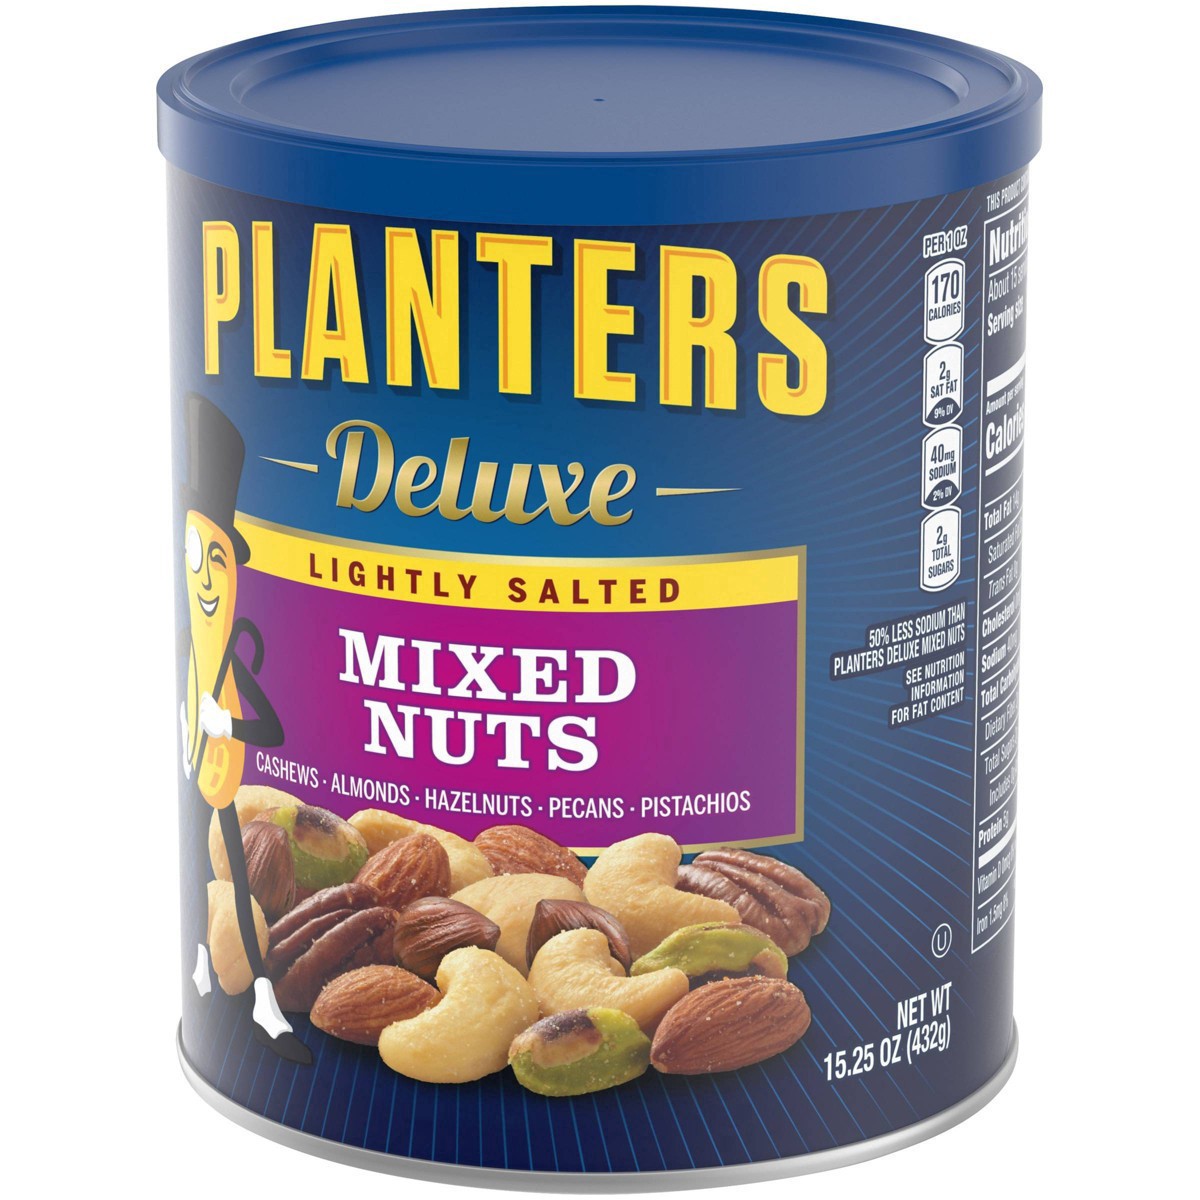 slide 38 of 46, Planters Deluxe Lightly Salted Mixed Nuts 15.25 oz, 15.25 oz